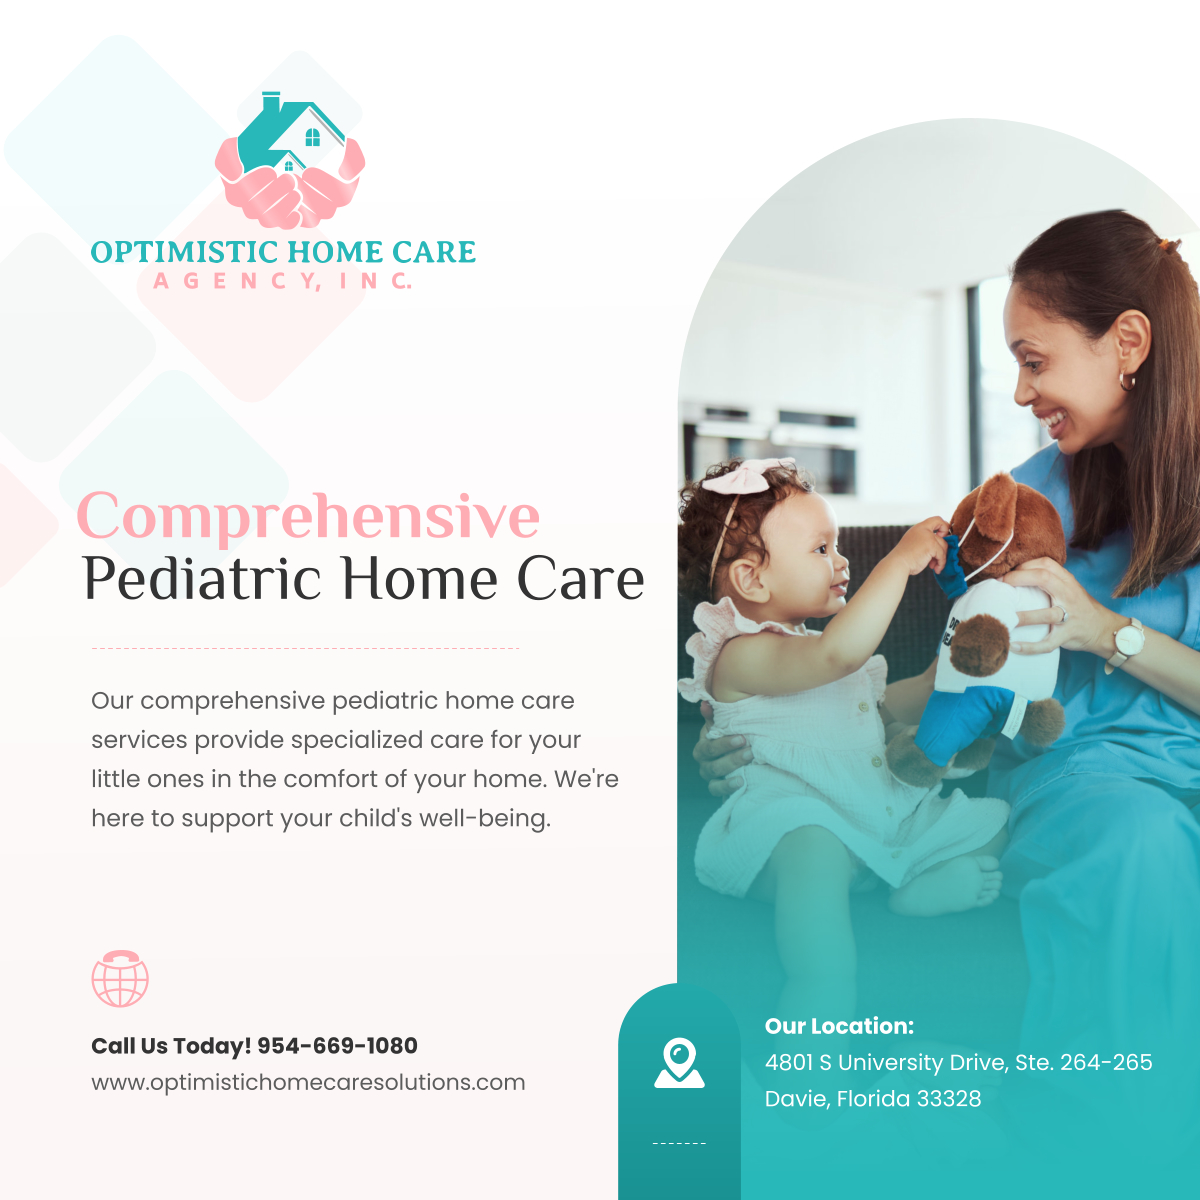 Discover expert care tailored to your child's needs. Our comprehensive pediatric home care ensures your child receives the best care while surrounded by the love of home.

#PediatricHomeCare #ChildsWellBeing #HomeCare #DavieFL #HomeHealthcare